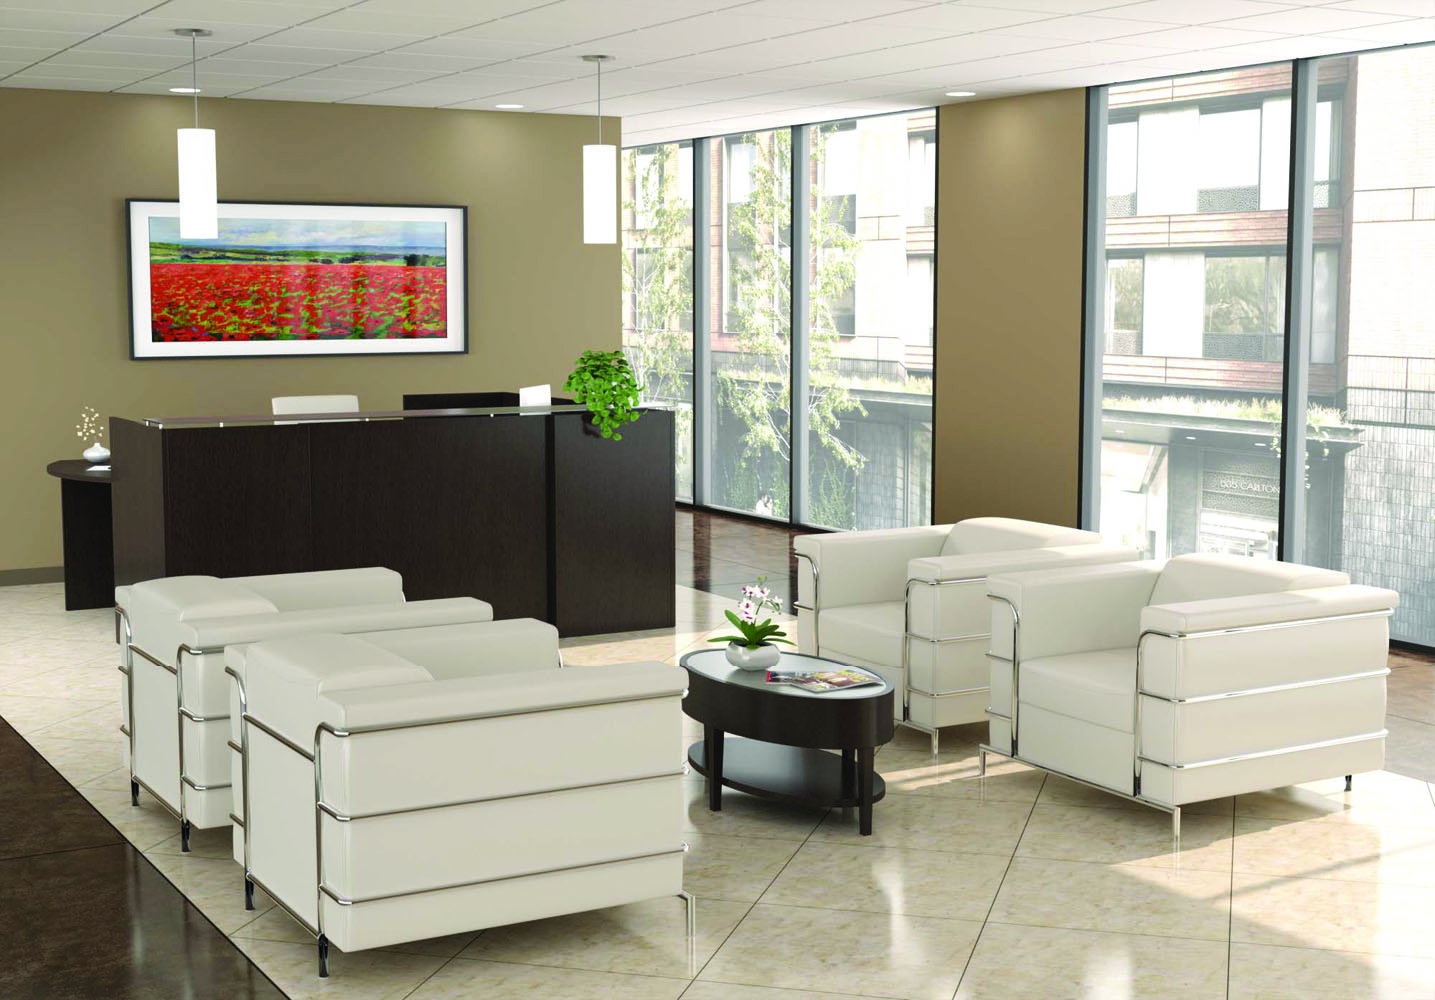 Office Lobby Design - First Impressions Office Furniture Sets